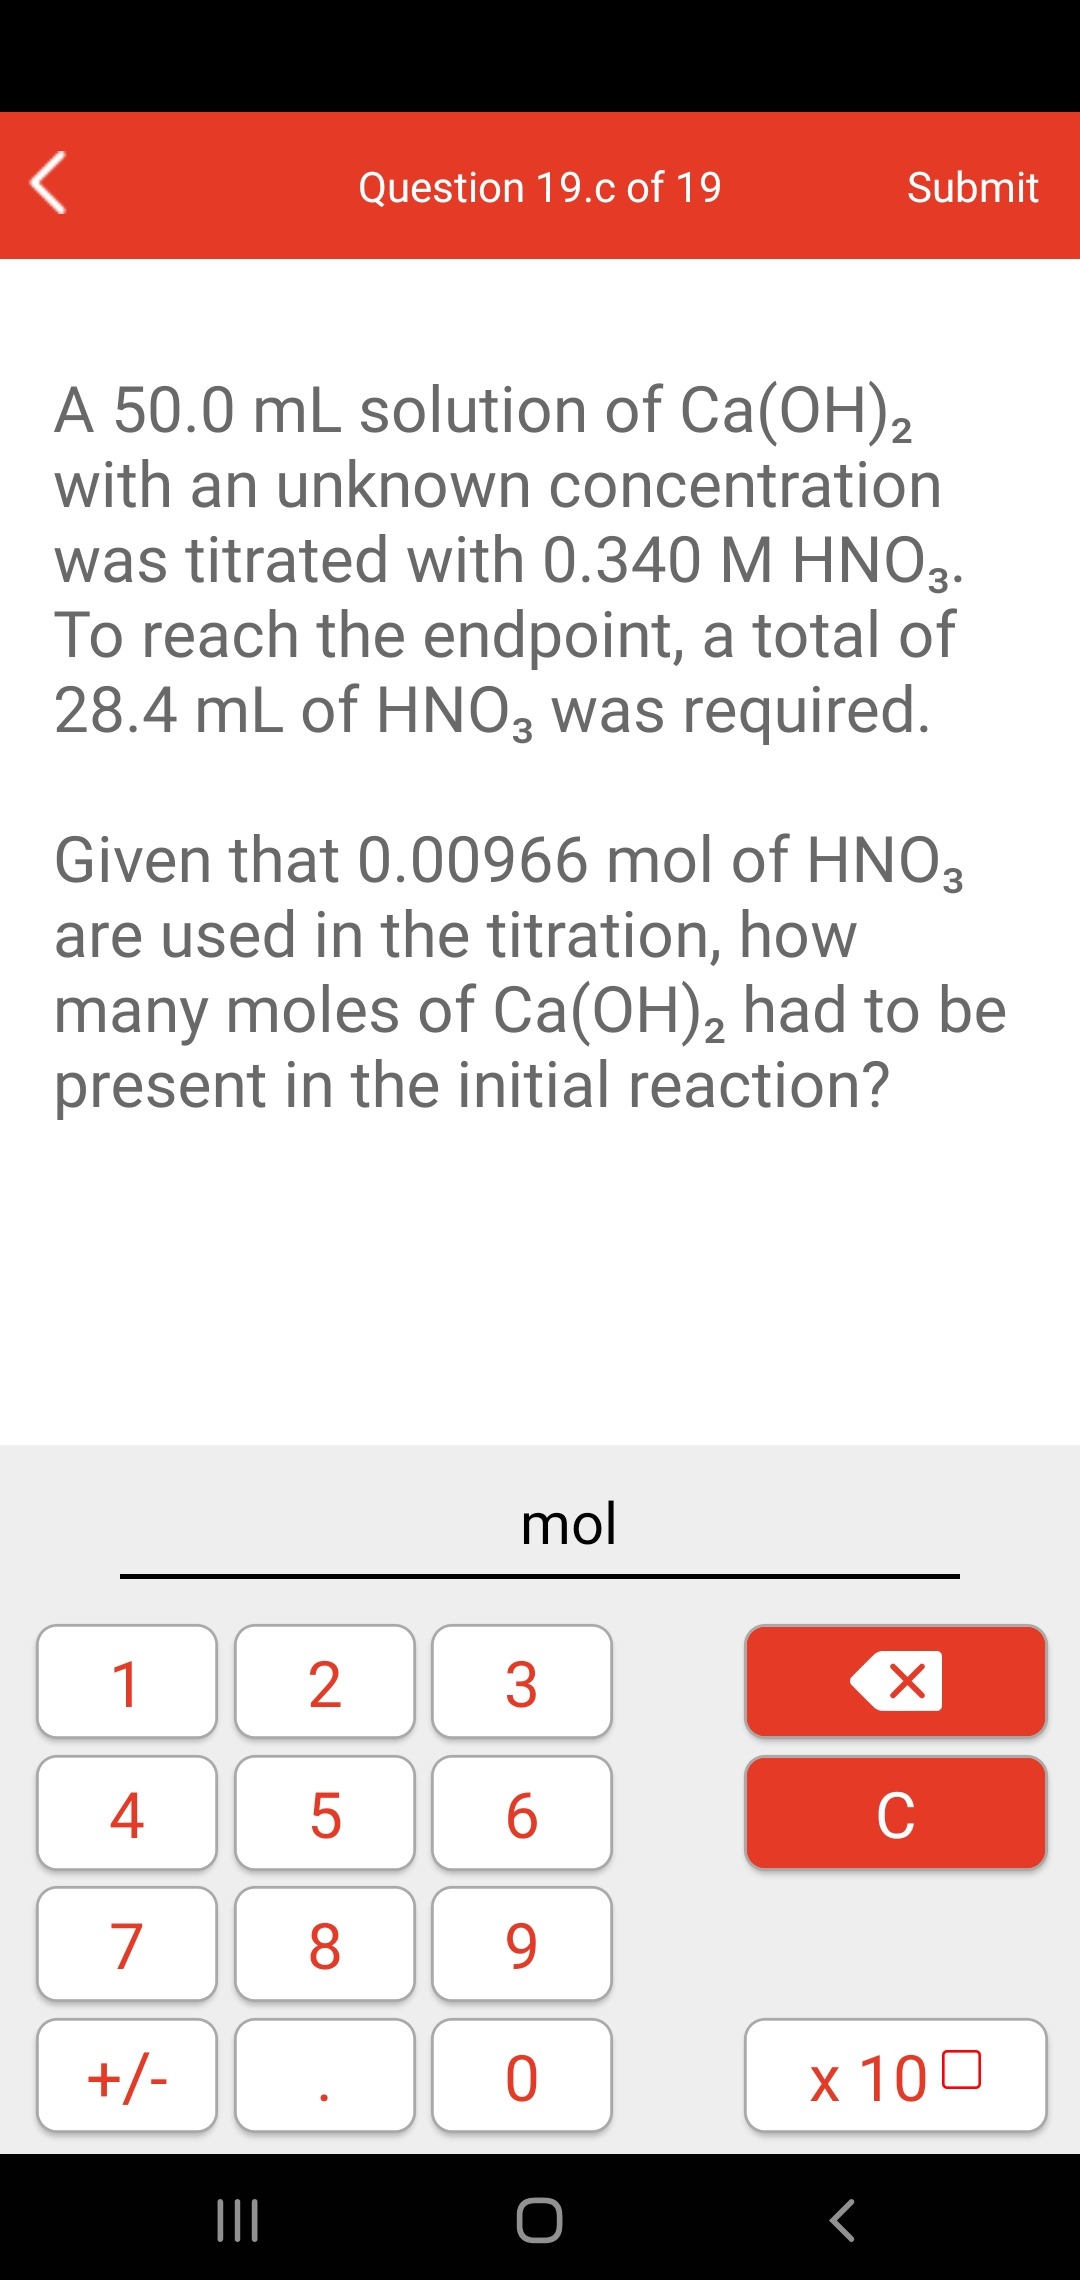 Question 19.c of 19
Submit
A 50.0 mL solution of Ca(OH),
with an unknown concentration
was titrated with 0.340 M HNO3.
To reach the endpoint, a total of
28.4 mL of HNO3 was required.
Given that 0.00966 mol of HNO3
are used in the titration, how
many moles of Ca(OH), had to be
present in the initial reaction?
2
mol
1
4
C
7
8.
9.
+/-
x 100
